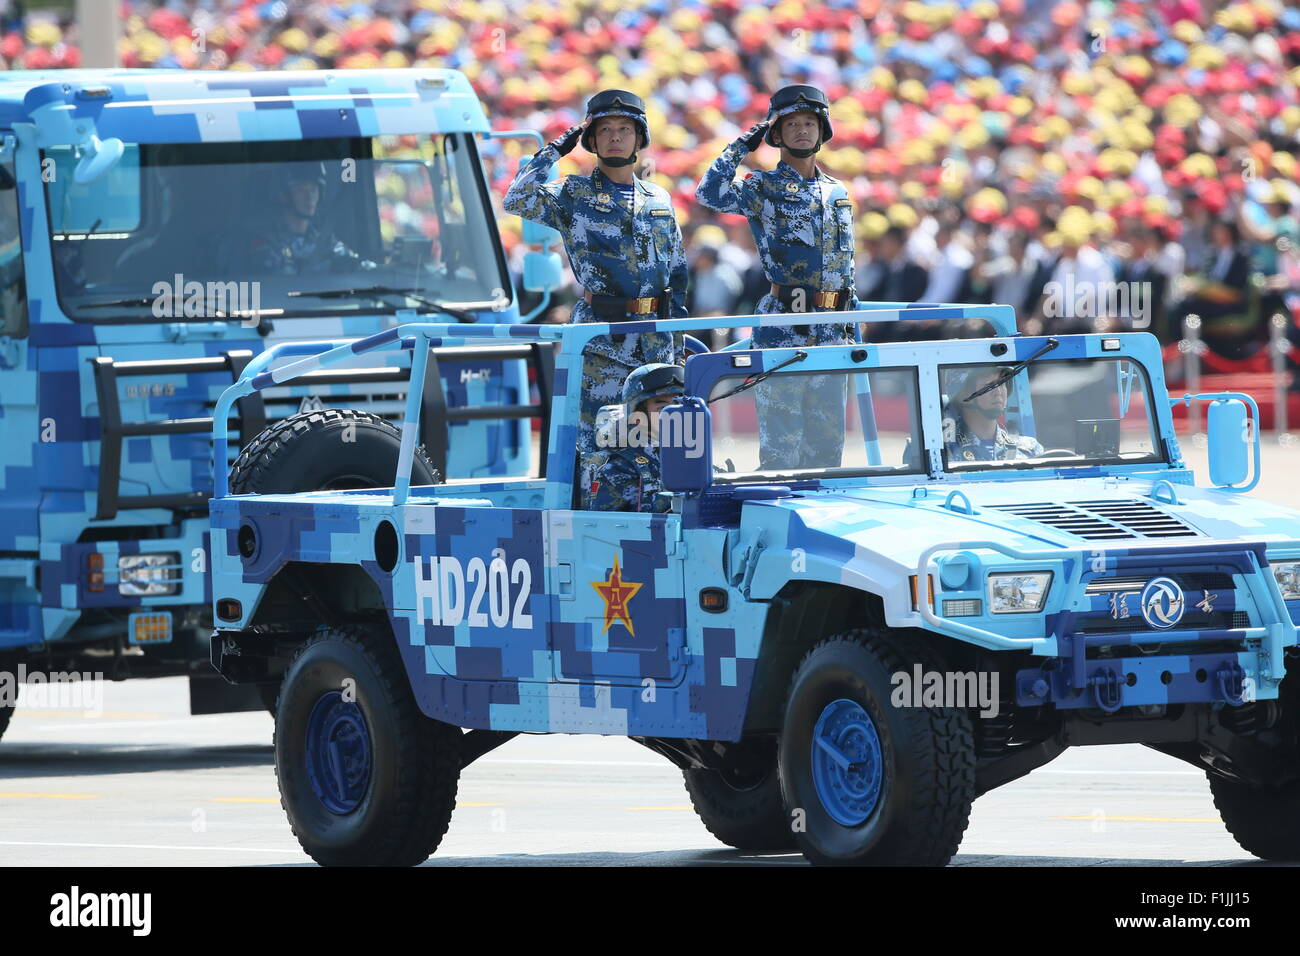 Beijing, China. 3rd September, 2015. Anti-ship missiles attend a parade in Beijing, capital of China, Sept. 3, 2015. China on Thursday held commemoration activities, including a grand military parade, to mark the 70th anniversary of the victory of the Chinese People's War of Resistance against Japanese Aggression and the World Anti-Fascist War.  (Xinhua/Jin Liwang) (dhf) Stock Photo